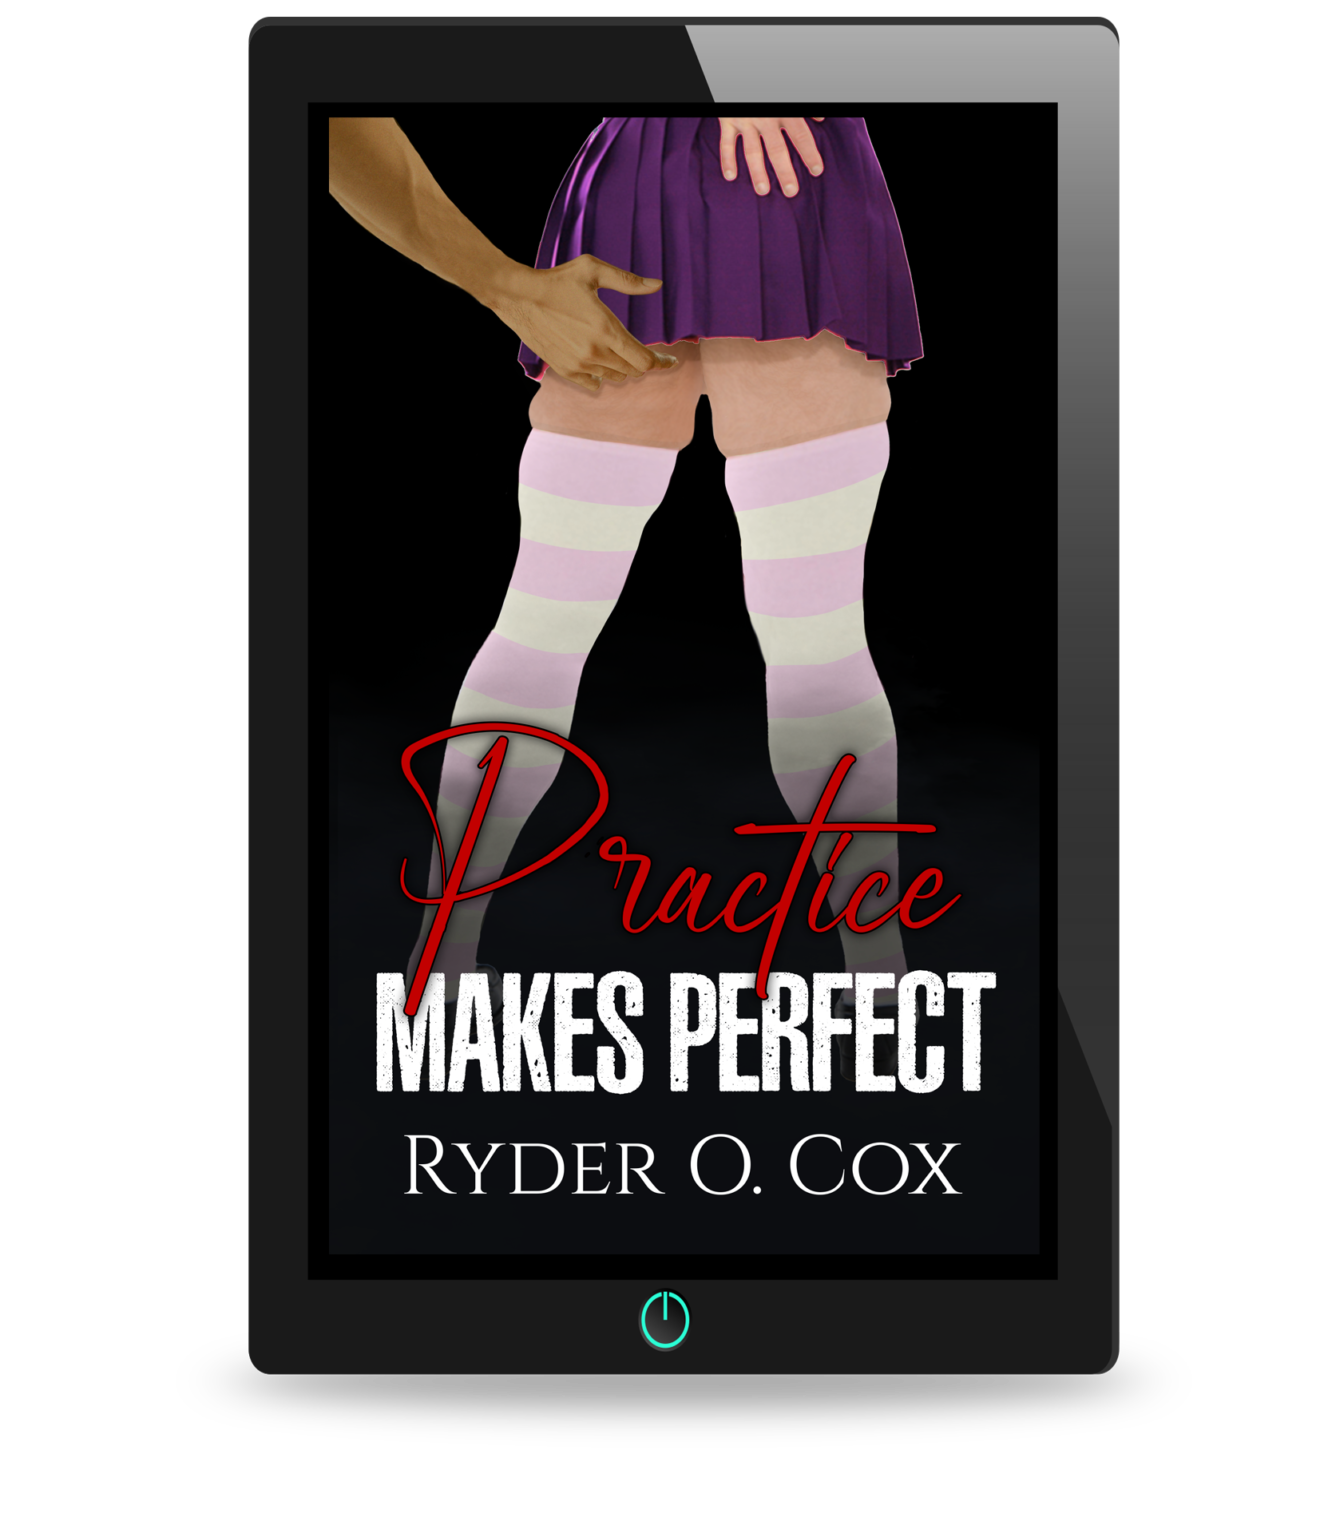 Practice Makes Perfect; a new steamy cross dressing M/M erotic romance short story coming soon from Ryder O. Cox